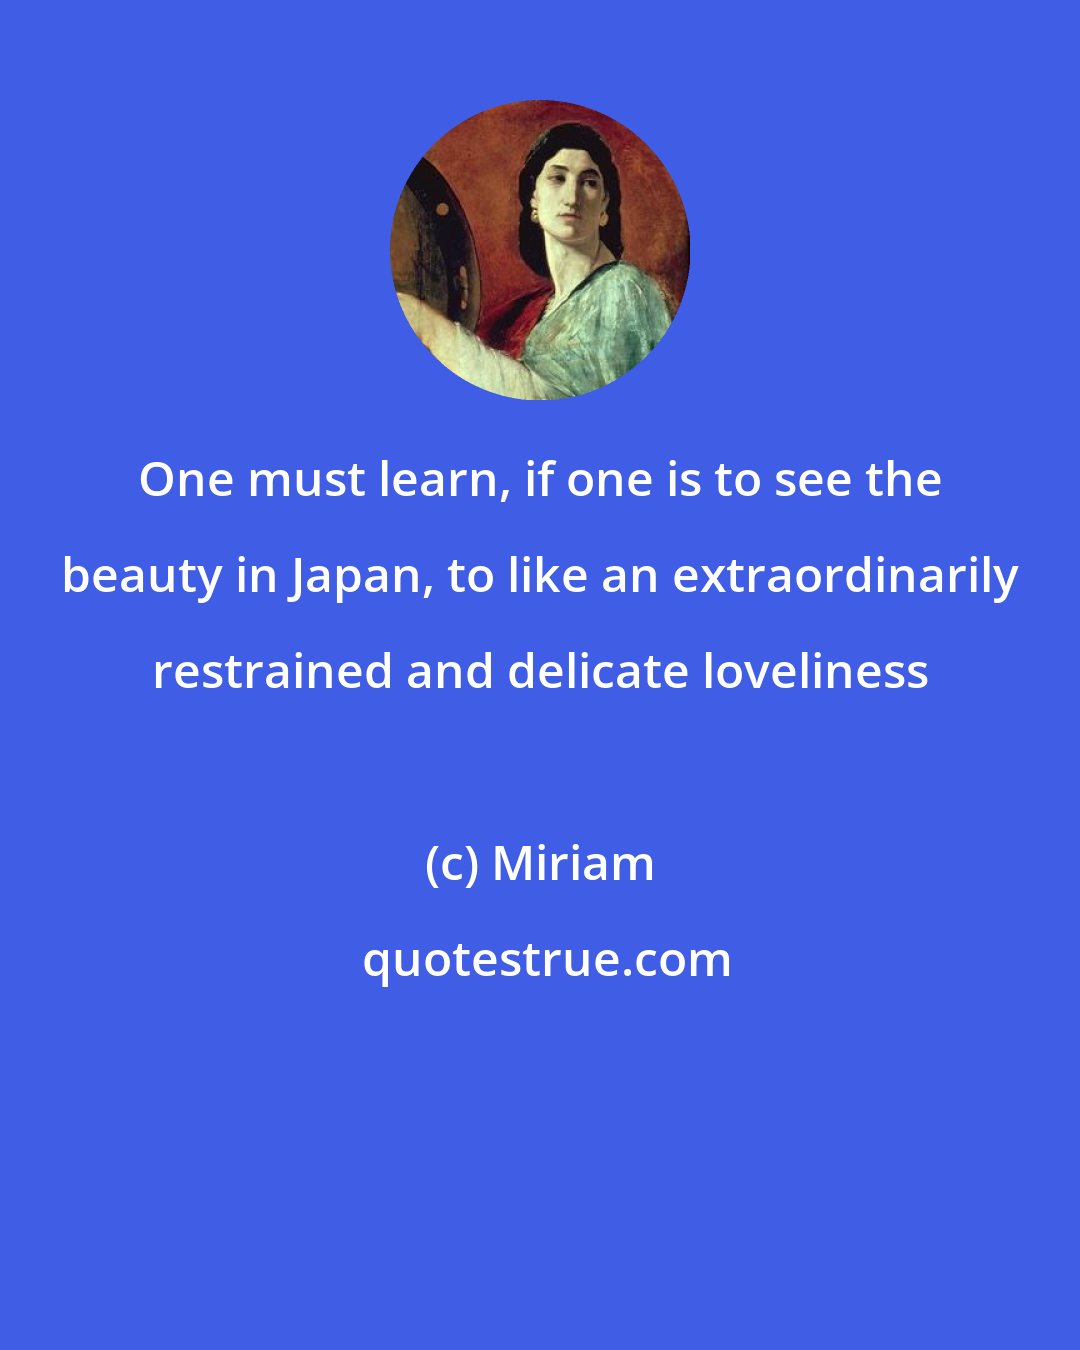 Miriam: One must learn, if one is to see the beauty in Japan, to like an extraordinarily restrained and delicate loveliness